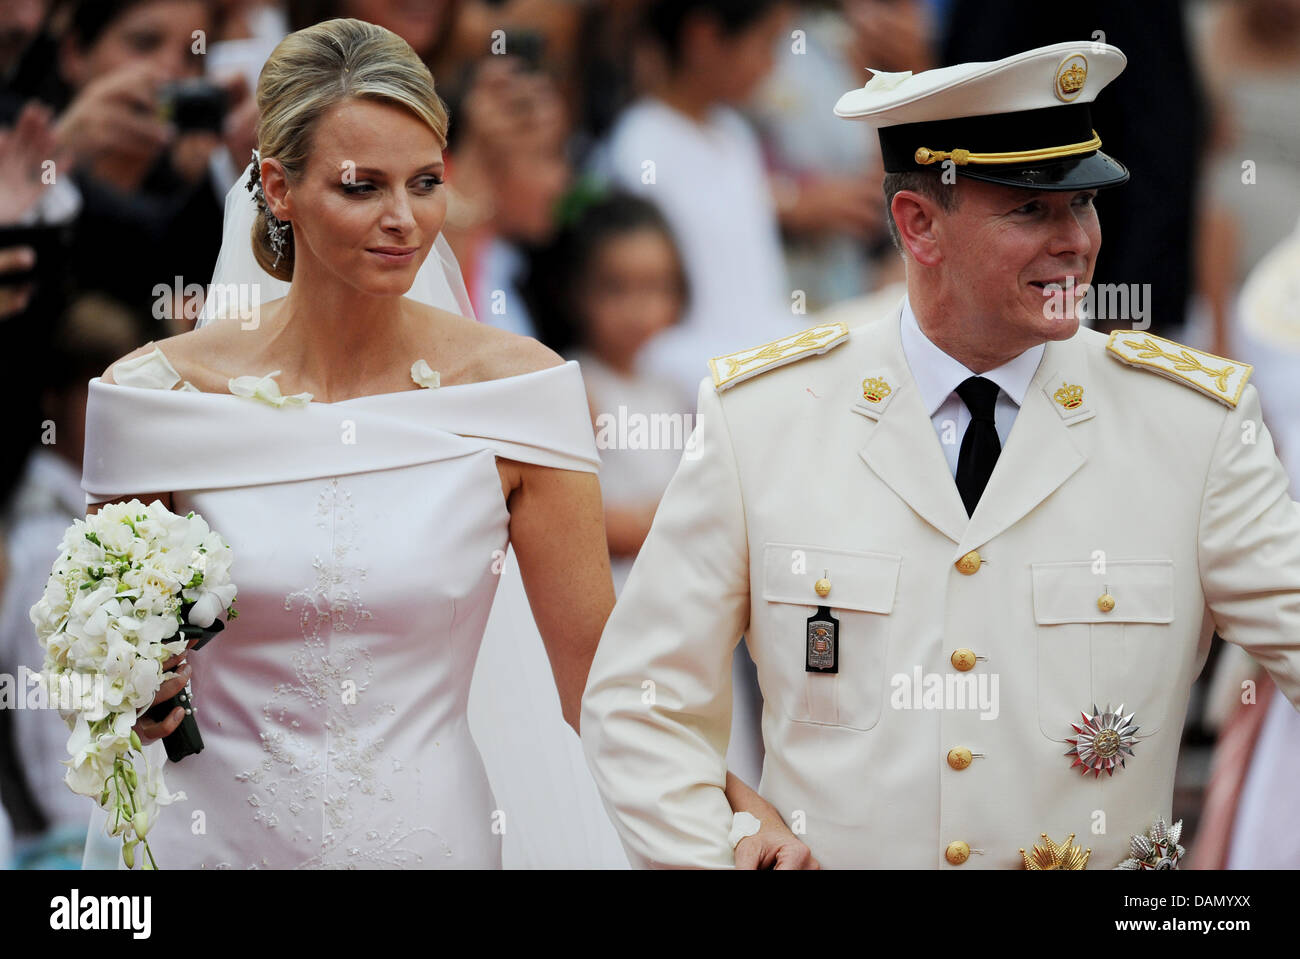 Prince Albert II of Monaco and his bride Princess Charlene after their religious wedding in Monaco, 02 July 2011. Some 3500 guests are expected to follow the ceremony. Photo: Frank May dpa Stock Photo